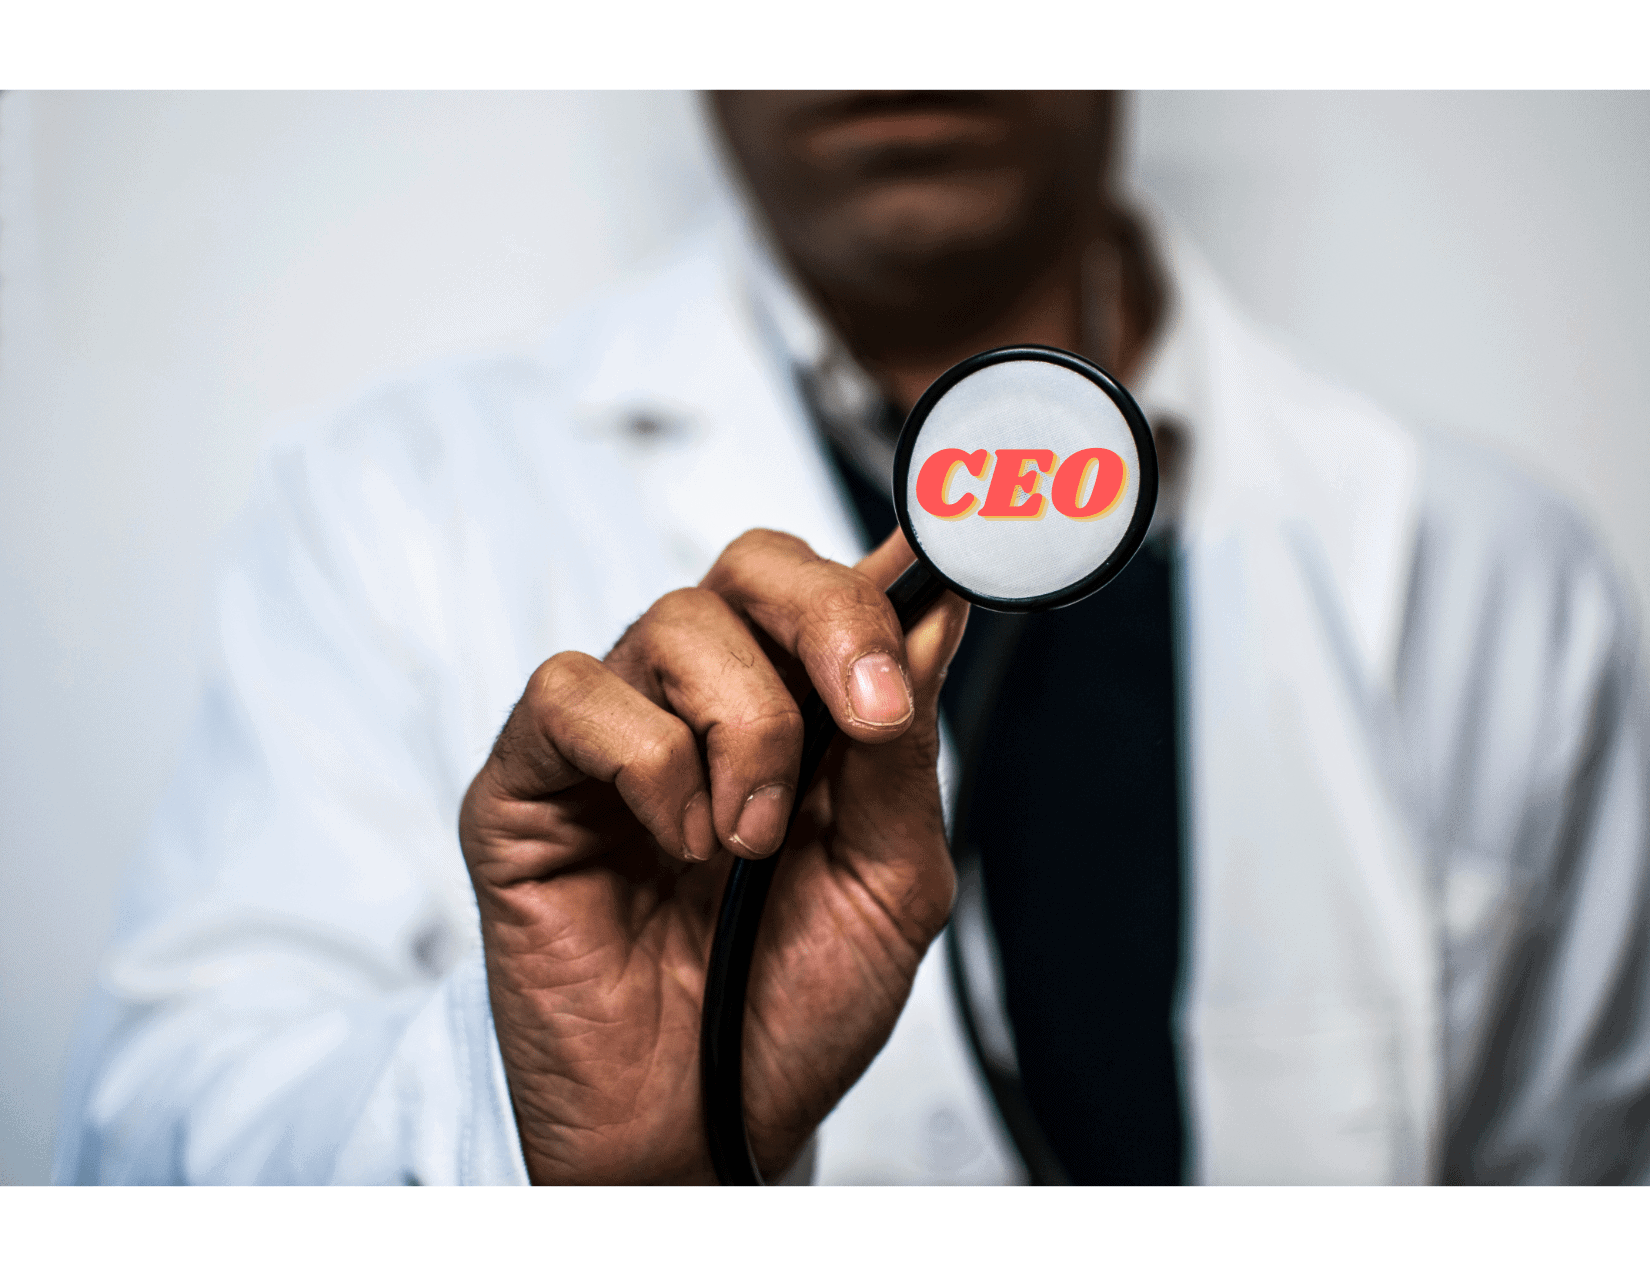 A Black doctor holding a stethoscope face-up (hand and stethoscope far in the foreground). The face of the stethoscope says "CEO" on it in coral lettering.